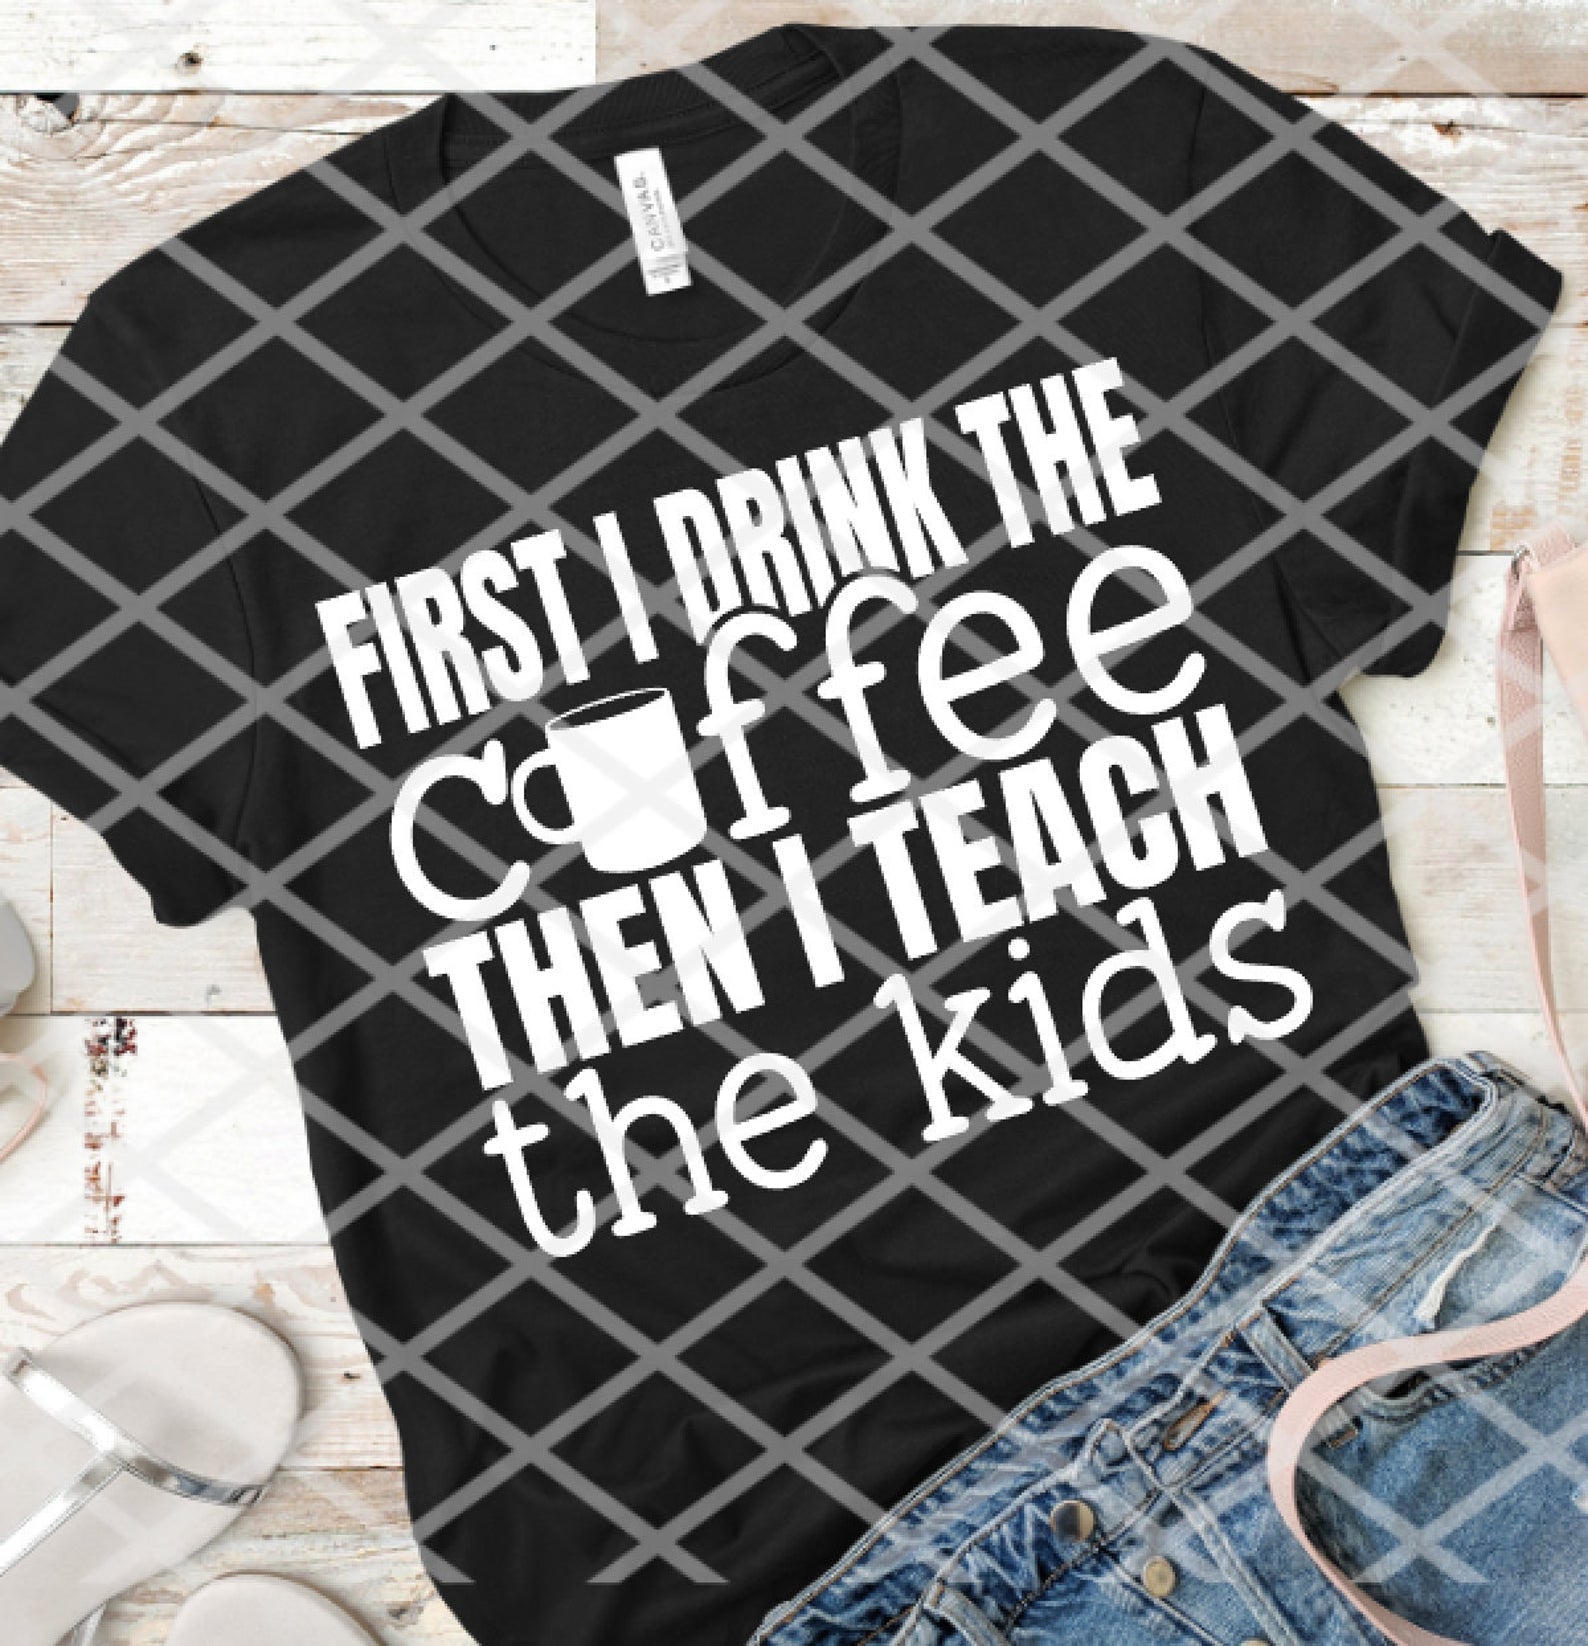 First I drink the coffee then I teach the kids, Screen print transfer